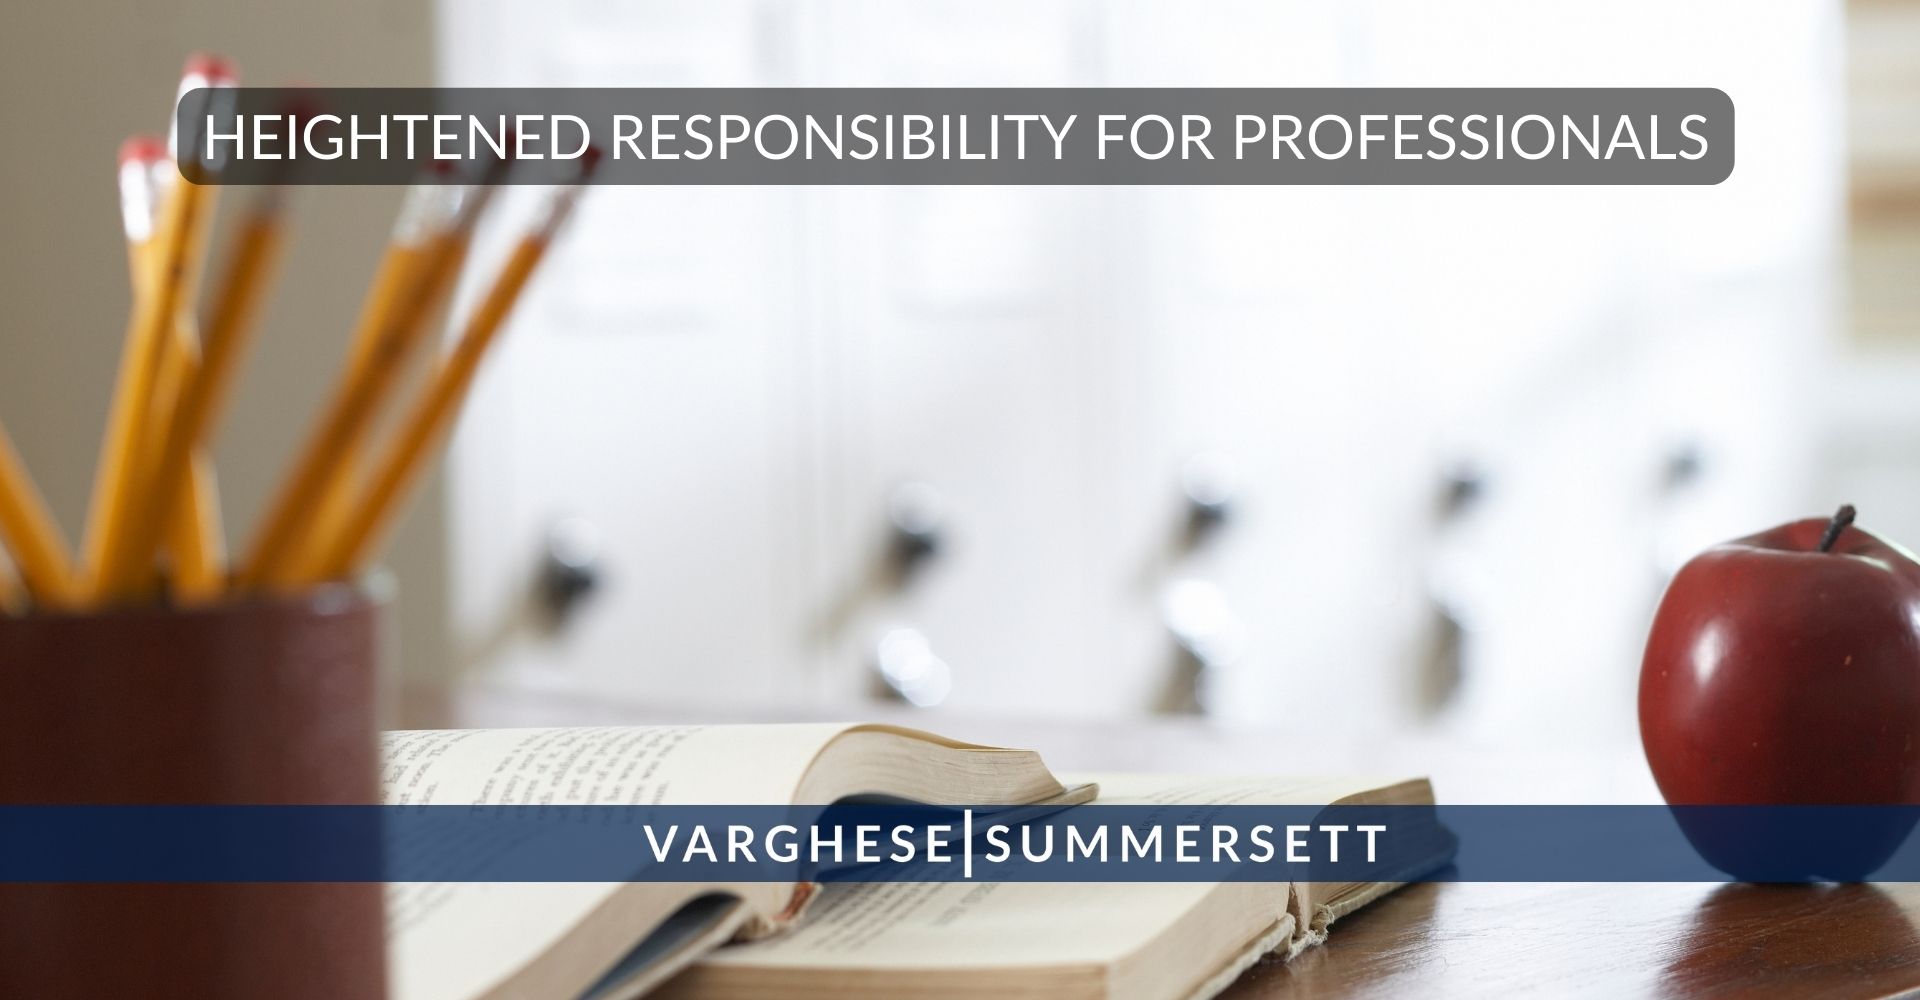 professionals with mandatory reporting requirements